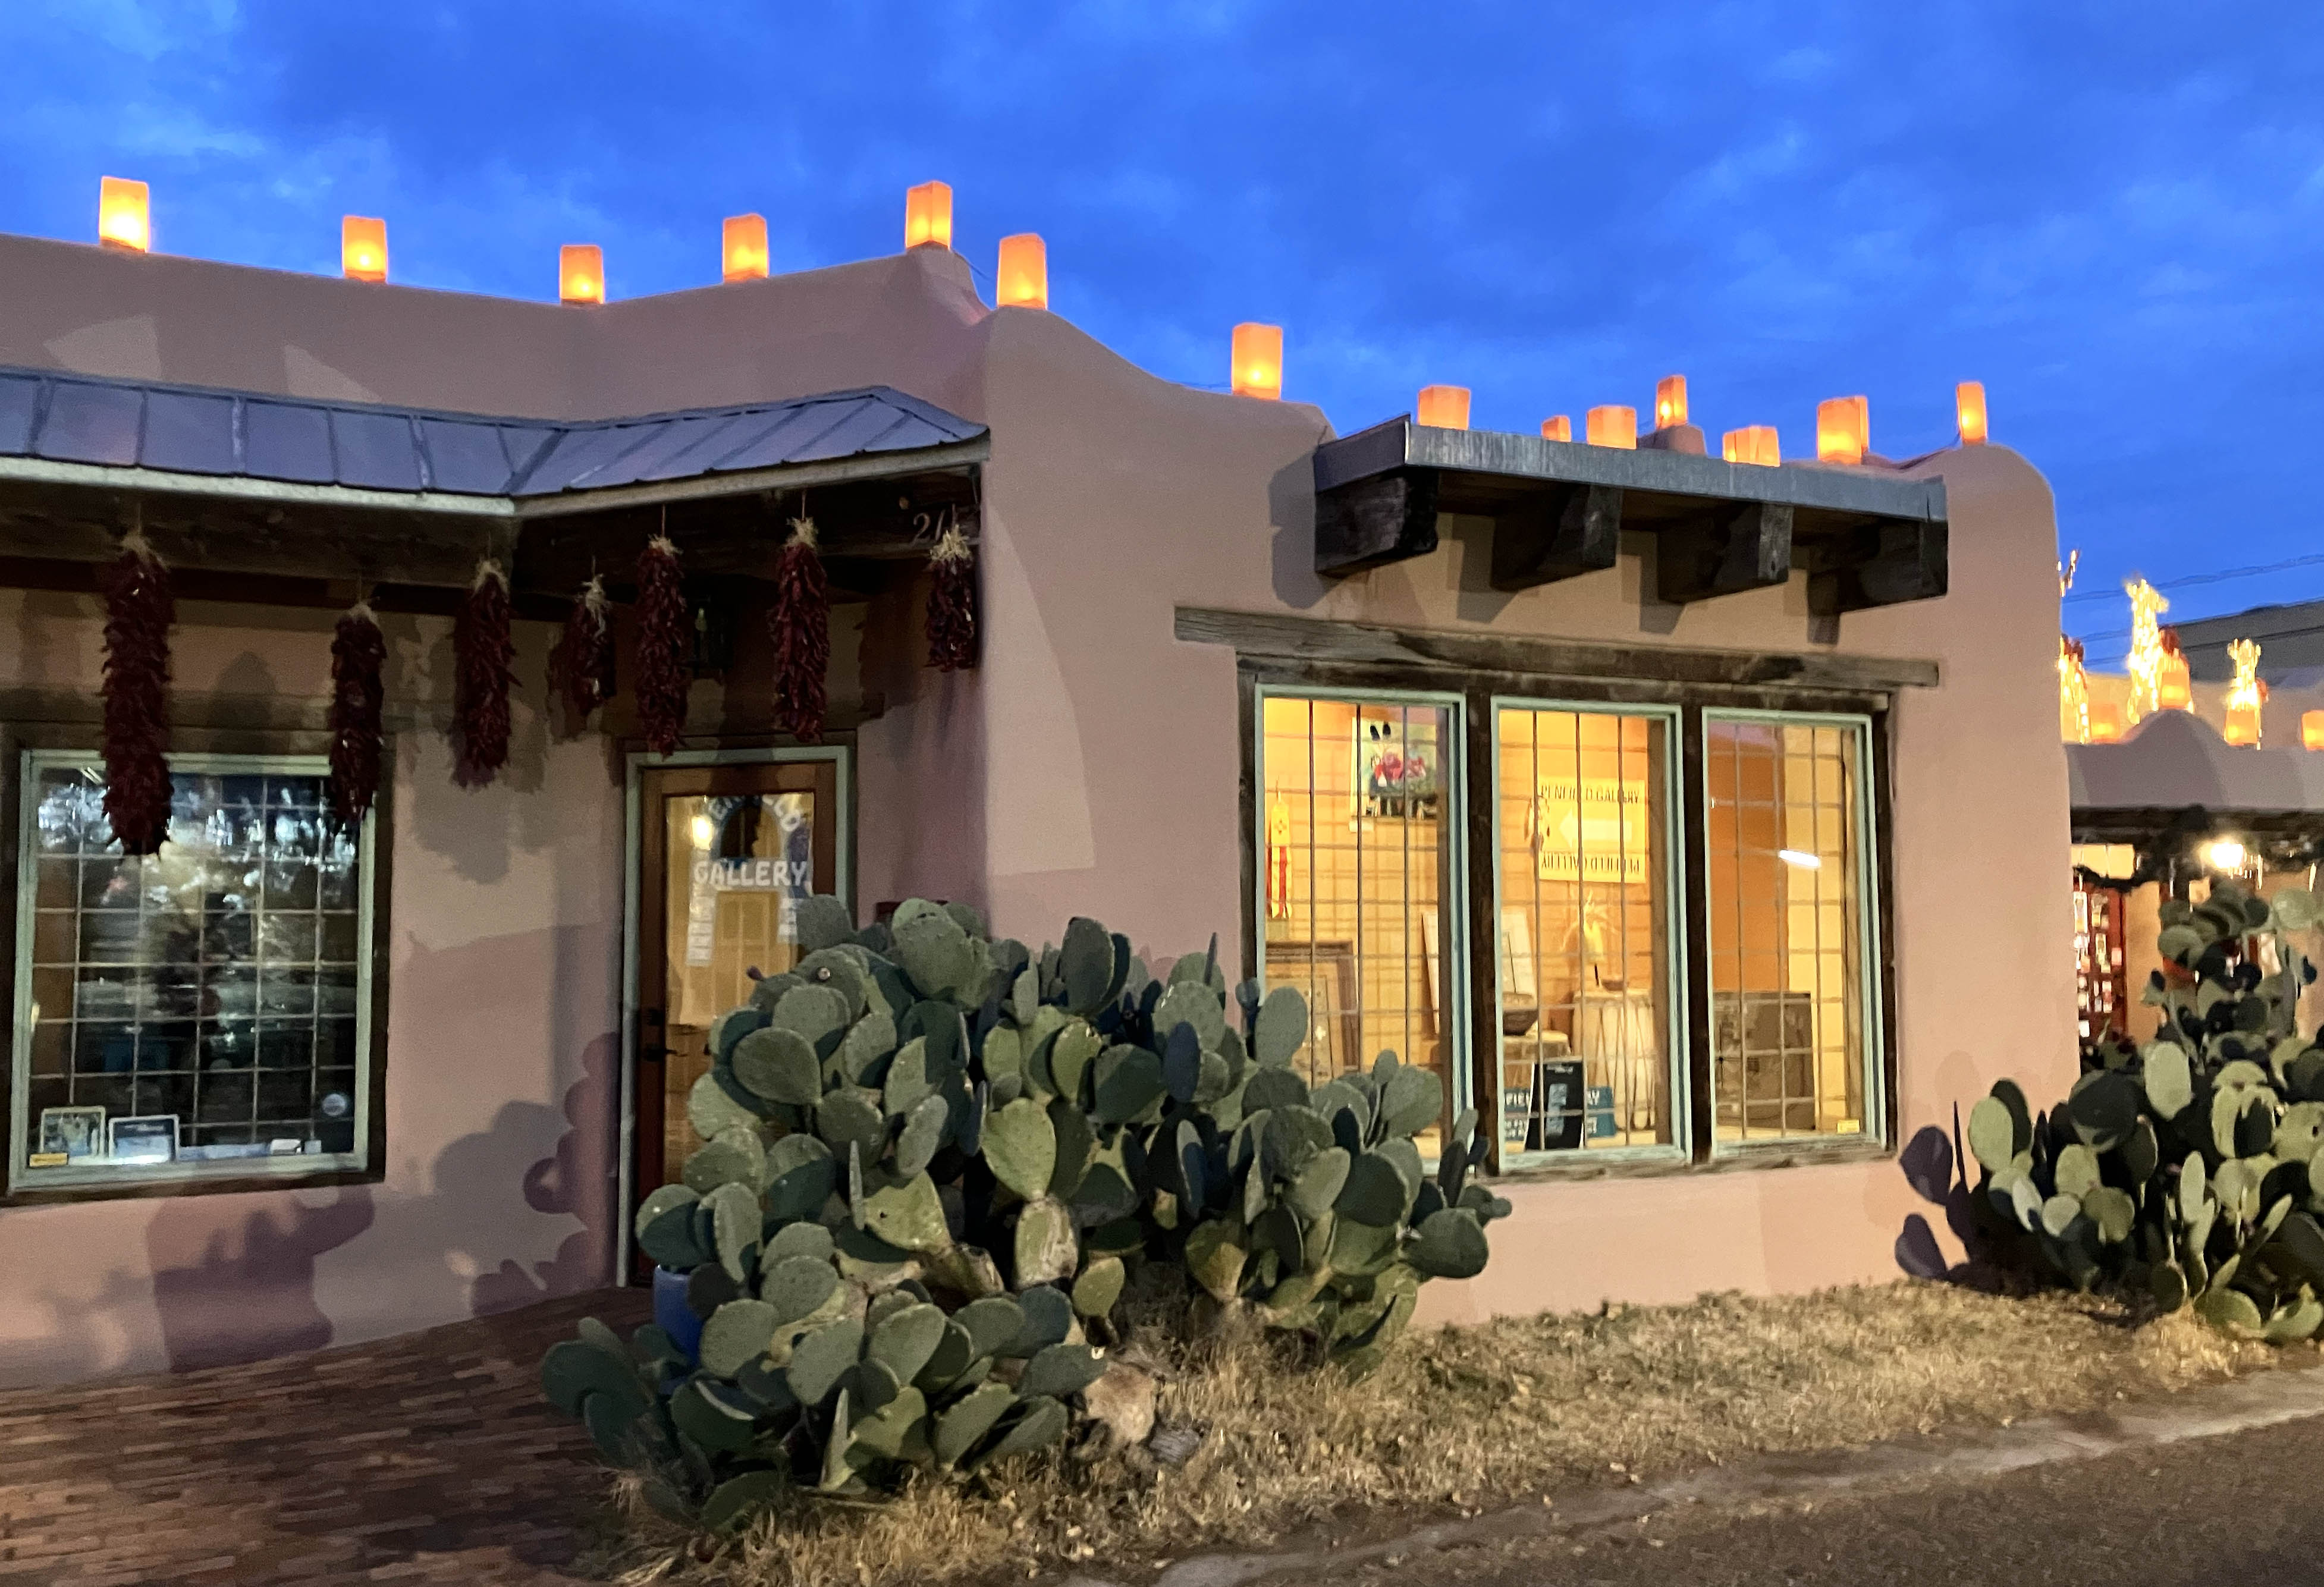 Penfield Gallery Store Front | Penfield Gallery of Indian Arts | Albuquerque, New Mexico